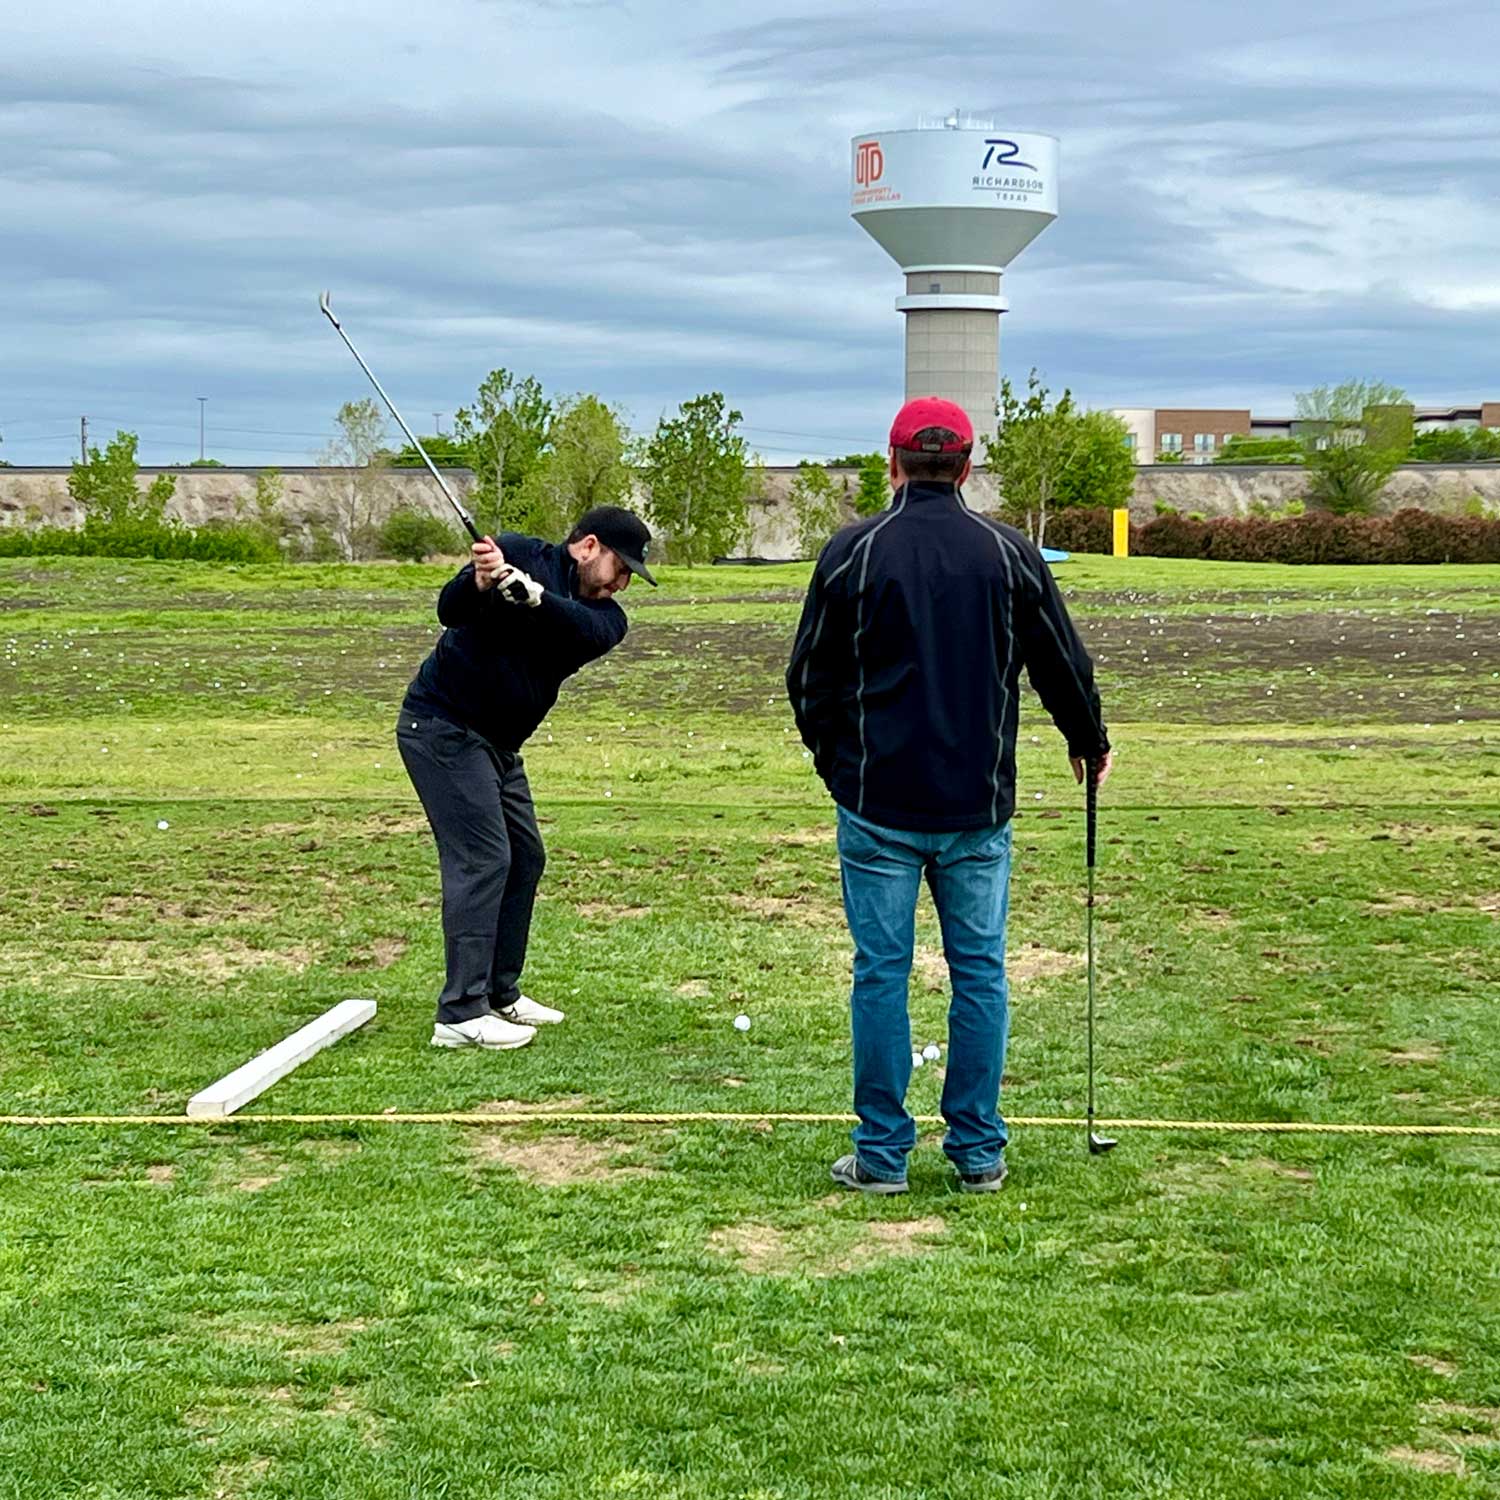 A student practices his swing under the observation of a golf instructor on the main driving range of Golf Ranch Richardson. In the distance beyond a hill, a water tower bearing the UTD and City of Richardson logos rises into a cloudy sky.